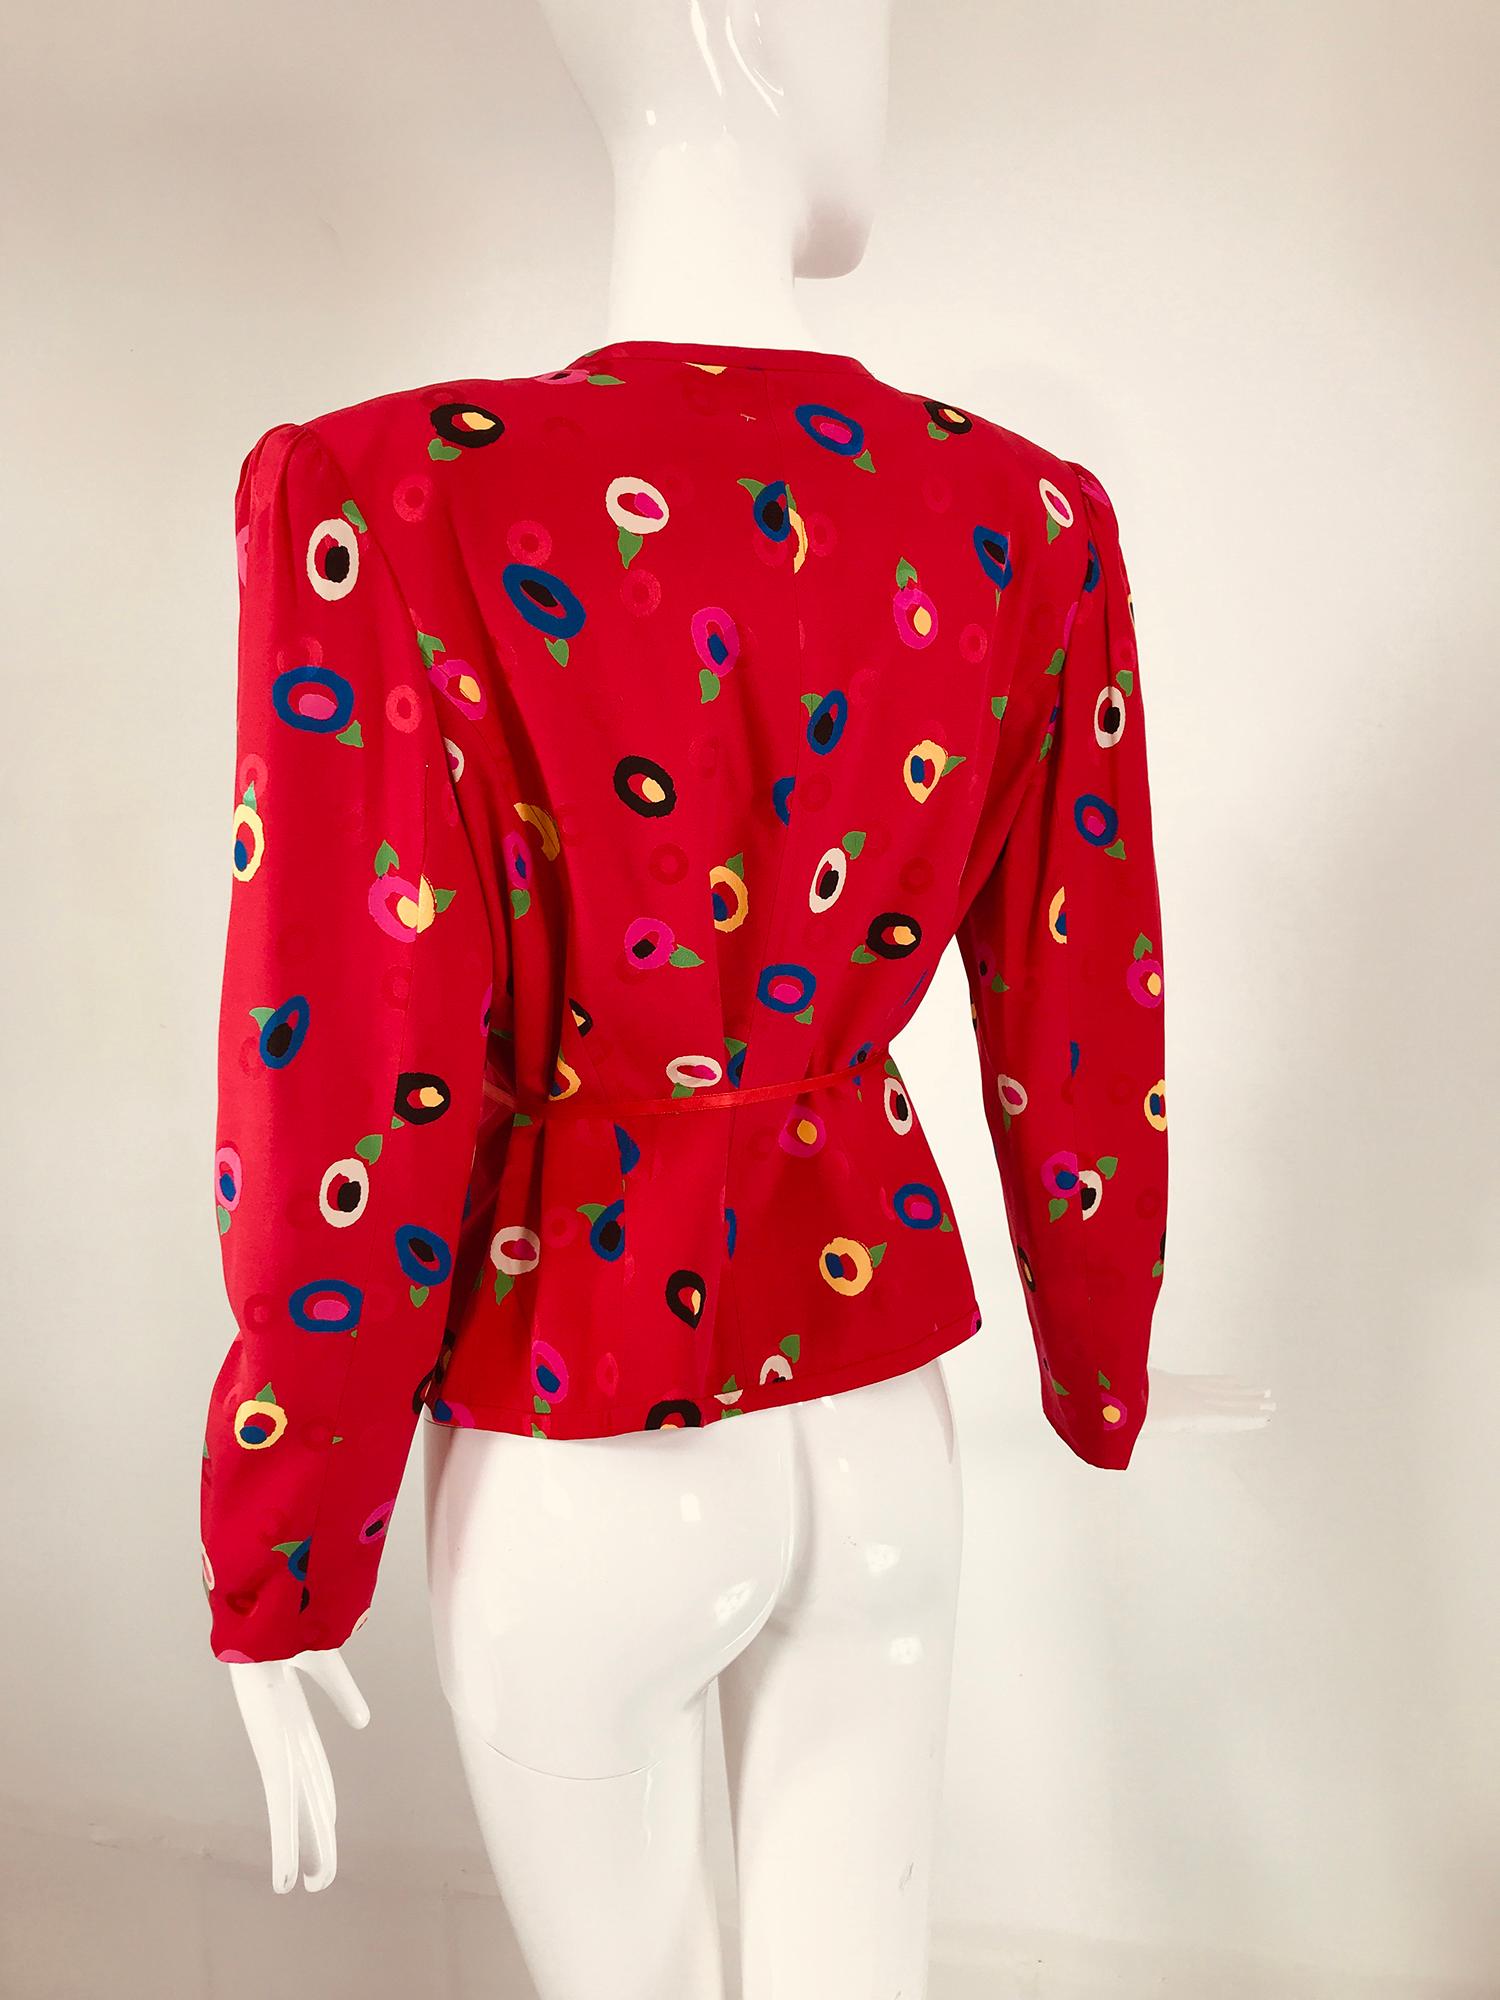 Ungaro Red Printed Silk Jacquard V Neck Button Front Jacket 1980s For Sale 2